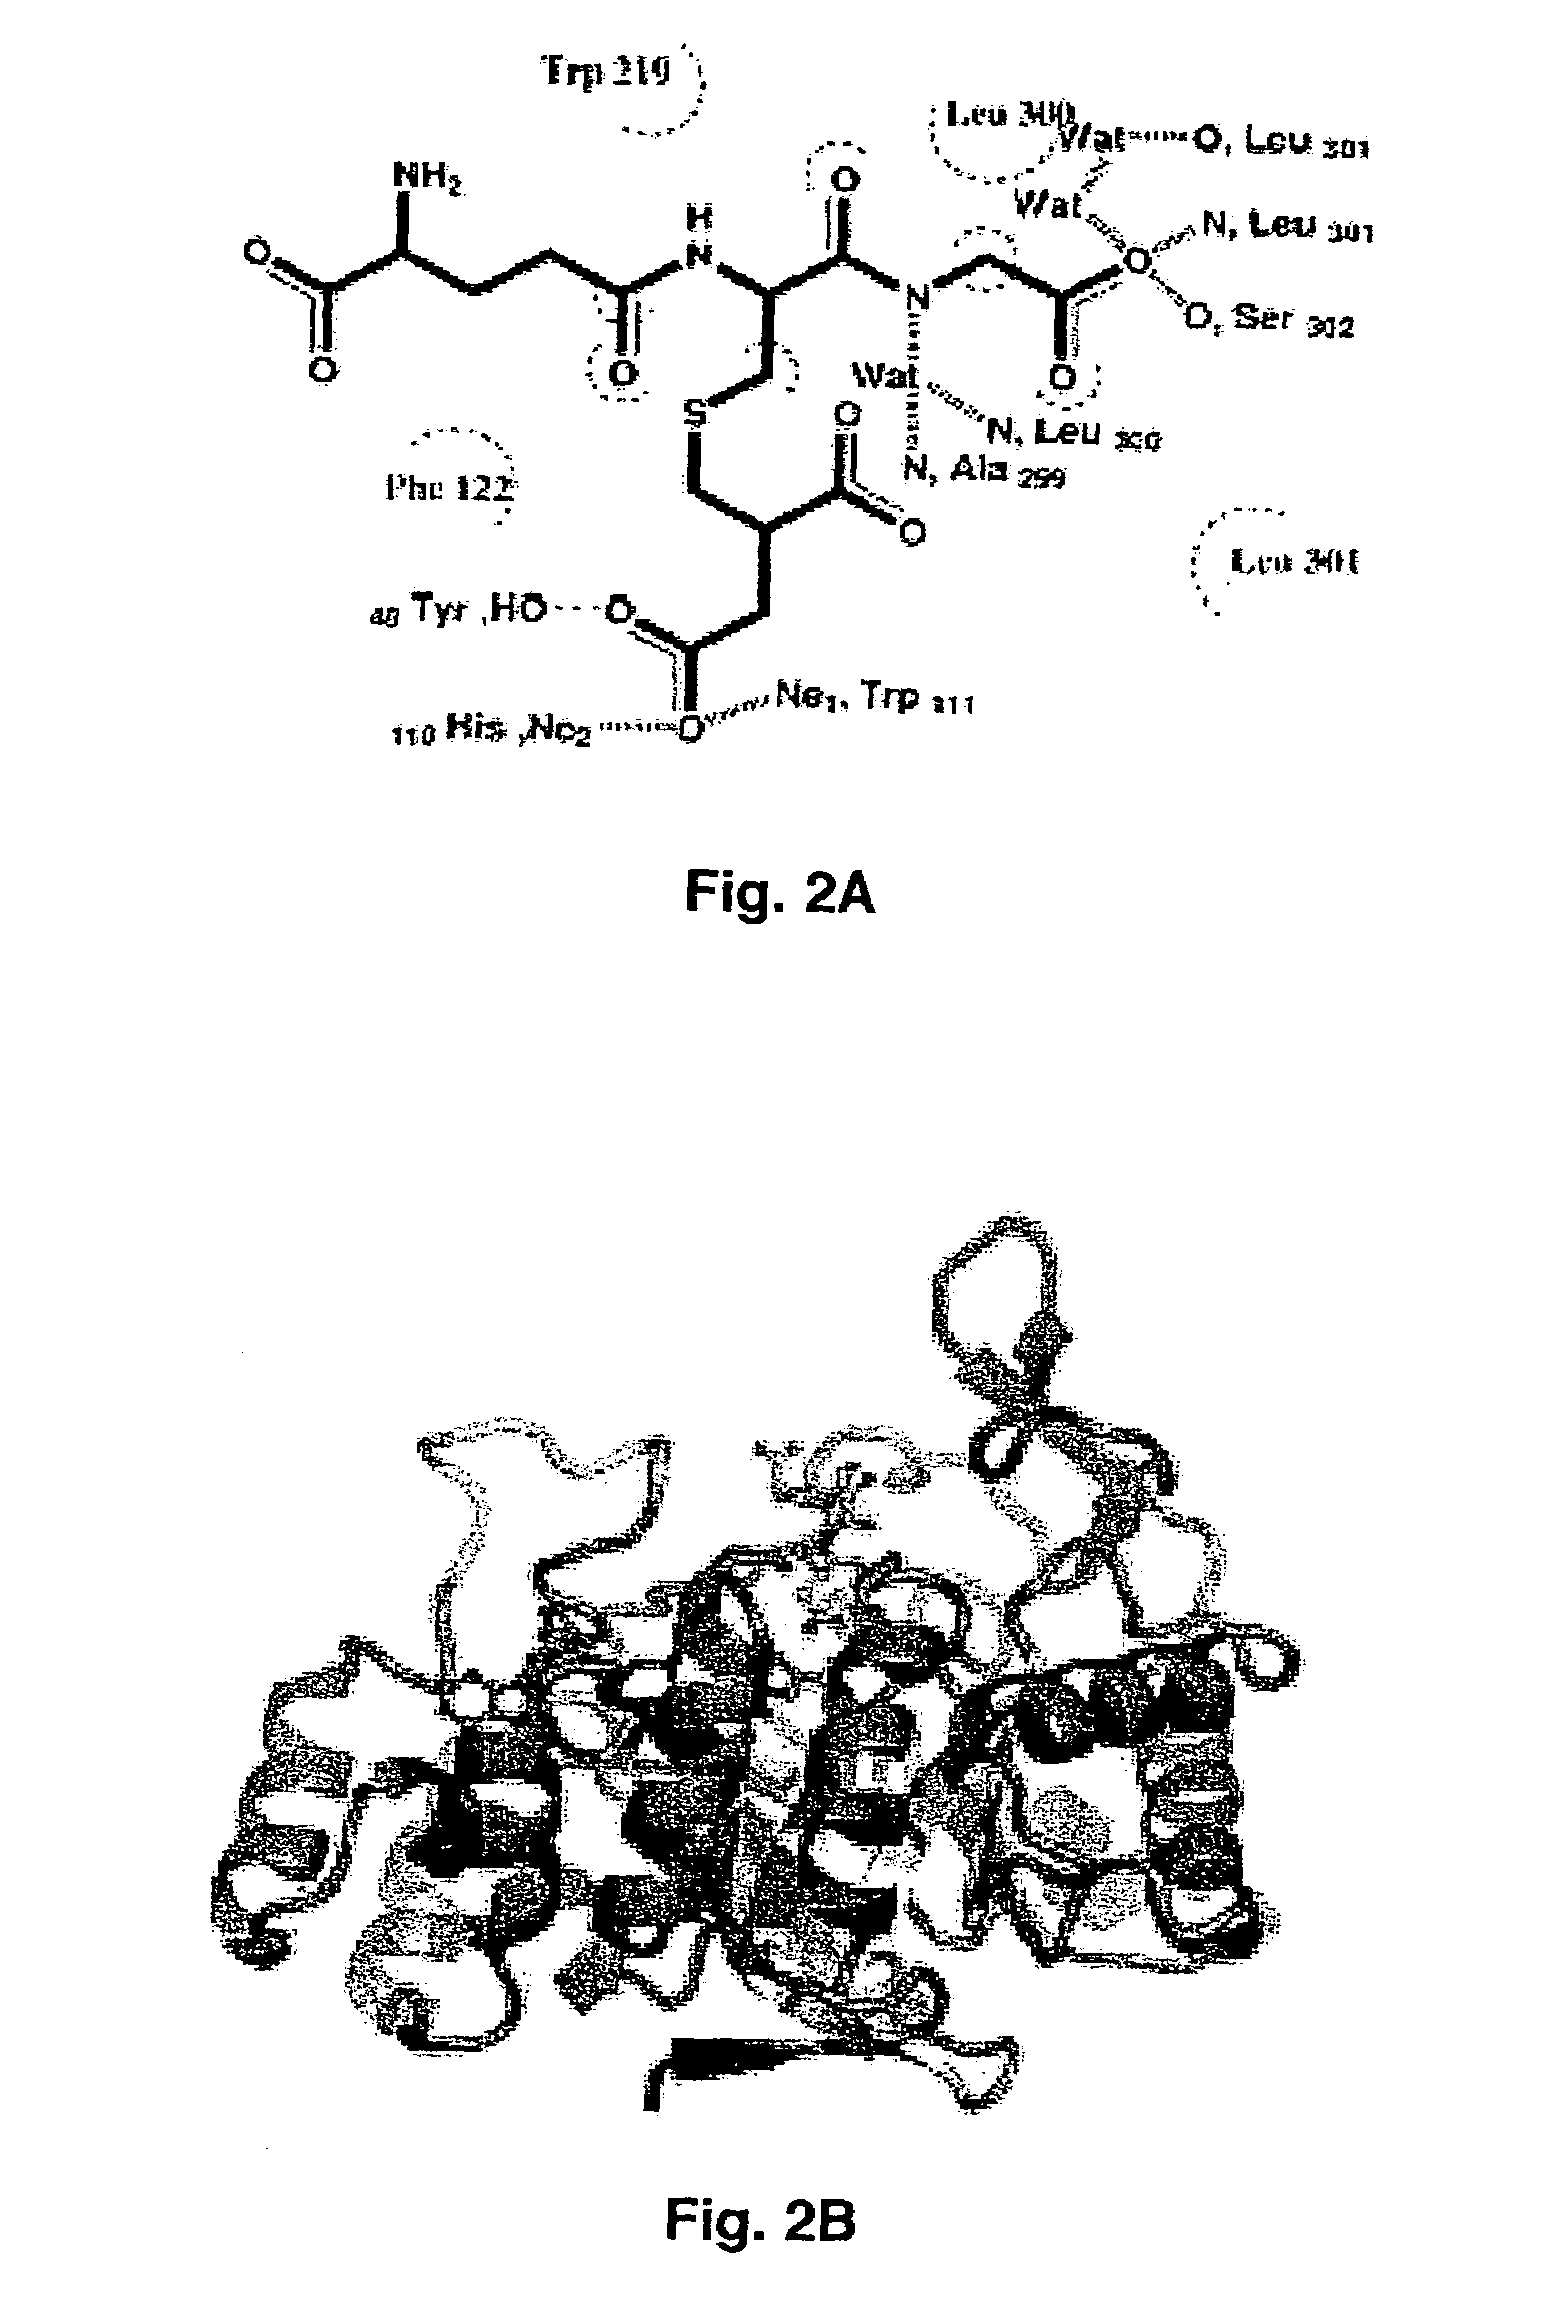 Method for designing a potential inhibitor of glutathione-aldehyde conjugate binding to aldose reductase